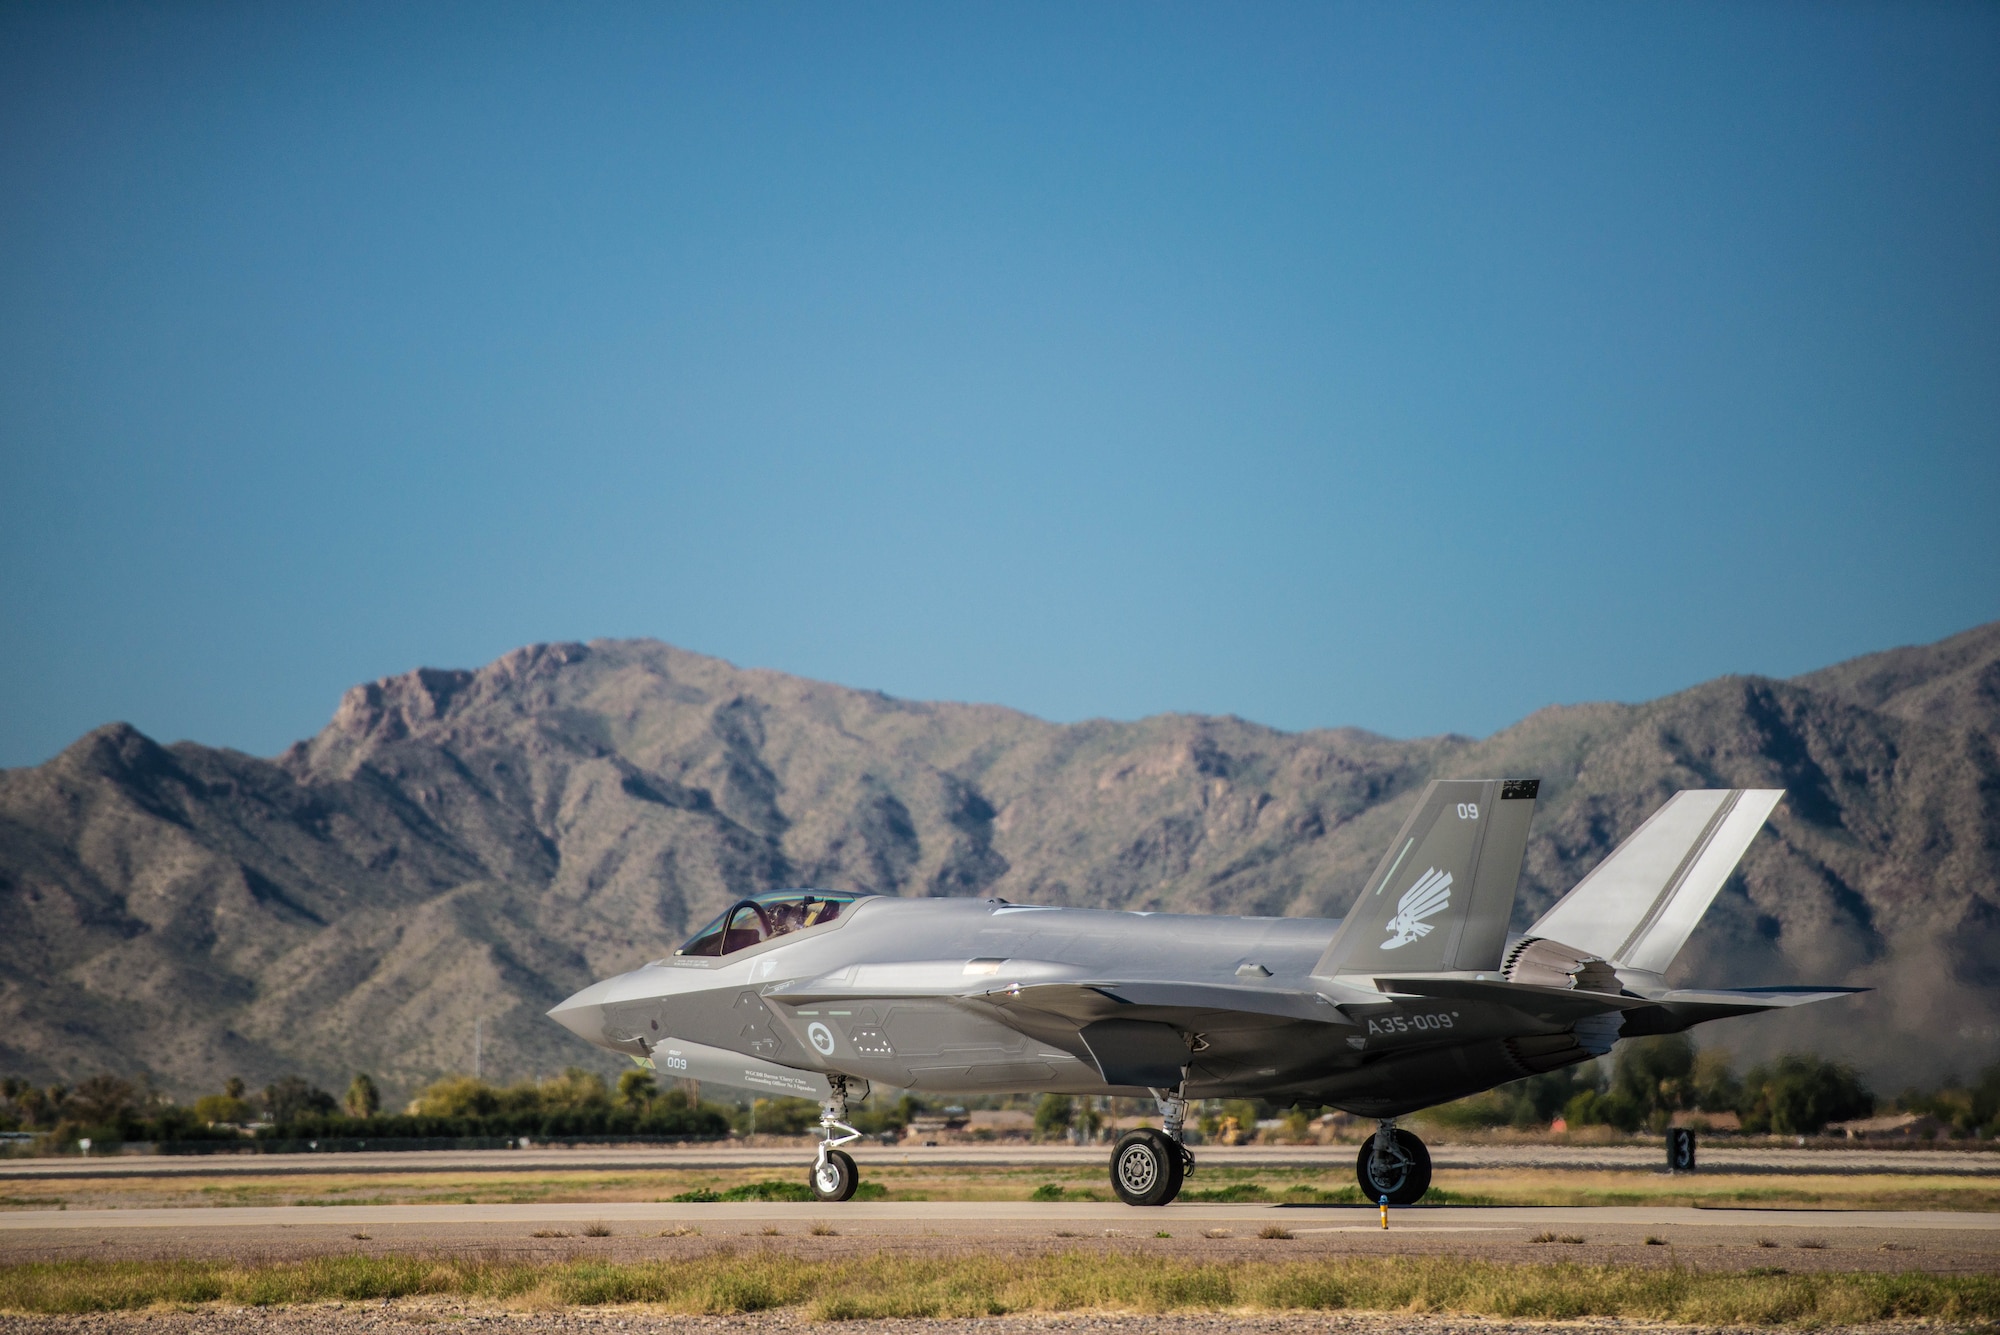 A Royal Australian Air Force F-35A Lightning II taxis at Luke Air Force Base, Ariz., Dec. 3, 2018. Two F-35s were preparing to take off and fly to Hawaii as part of their multi-day journey to Australia. (U.S. Air Force photo by Staff Sgt. Jensen Stidham)